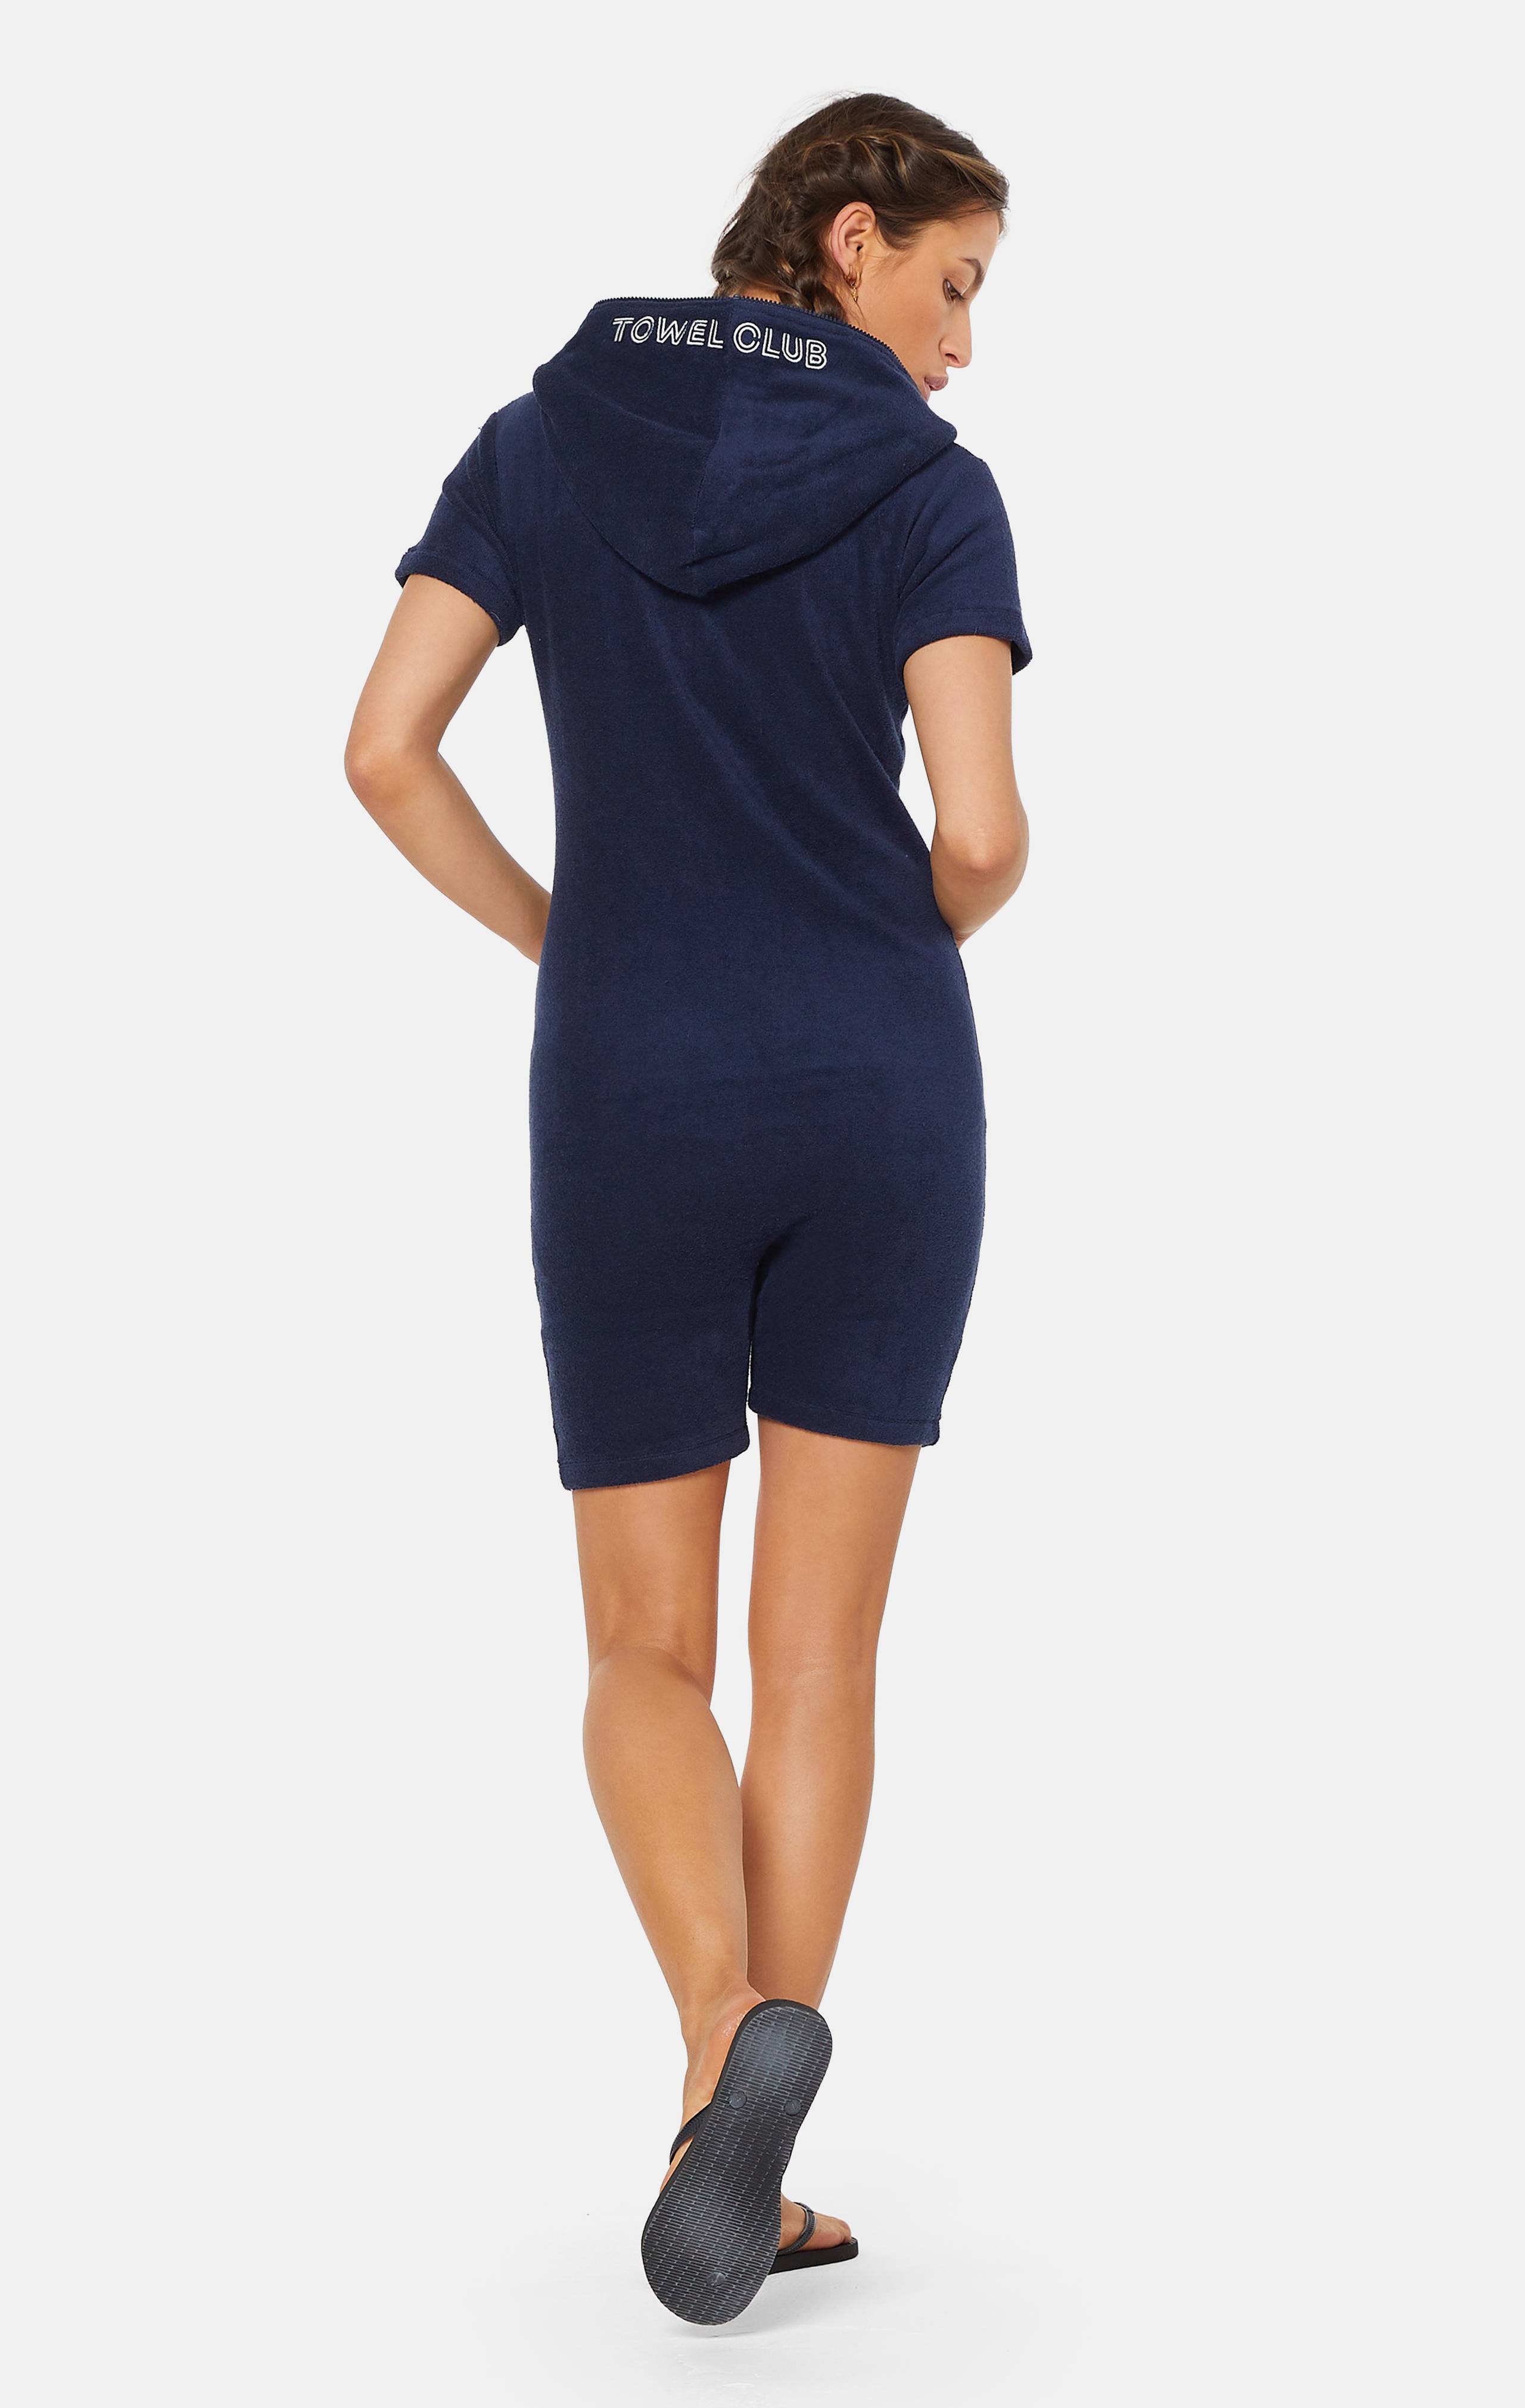 Onepiece Towel Club Fitted Short Jumpsuit Navy - 5